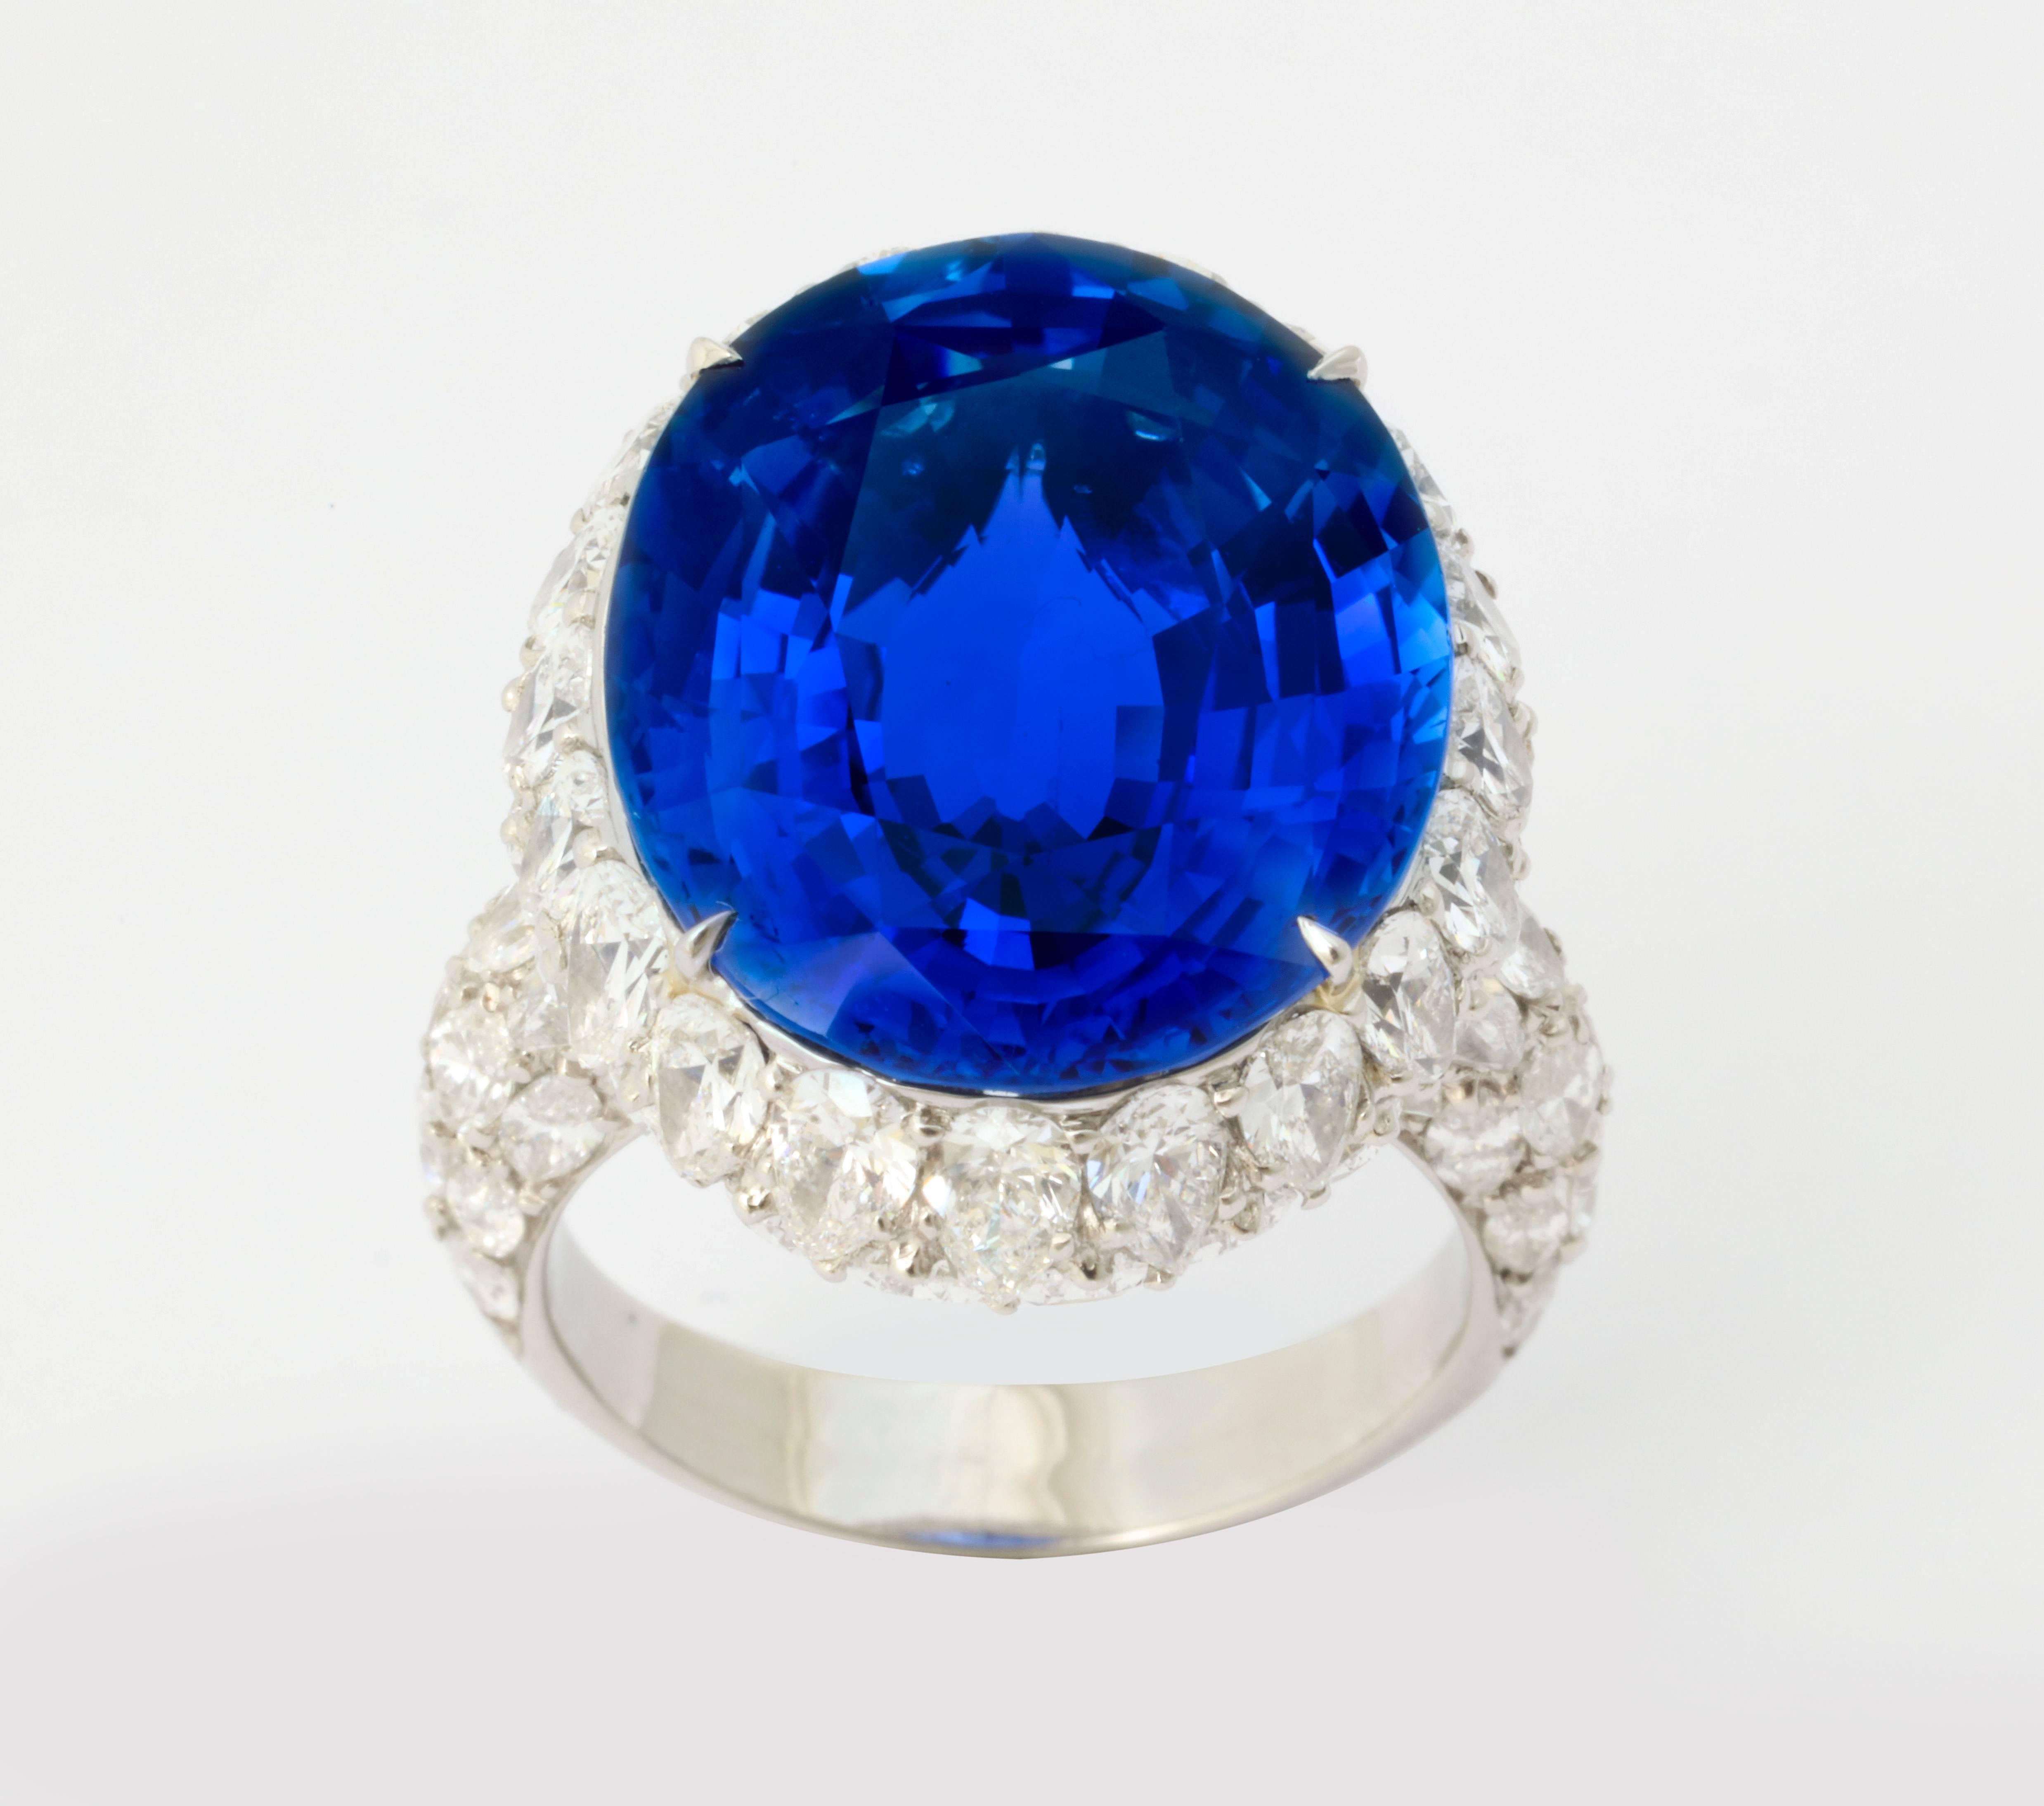 This exquisite ring features one of the finest Ceylon sapphires that you will ever see.  The stone weighs 20.13 carats and is certified by both the GRS and the AIGS to be of Ceylon (Sri Lanka) origin and without heat treatment.  The cut is a